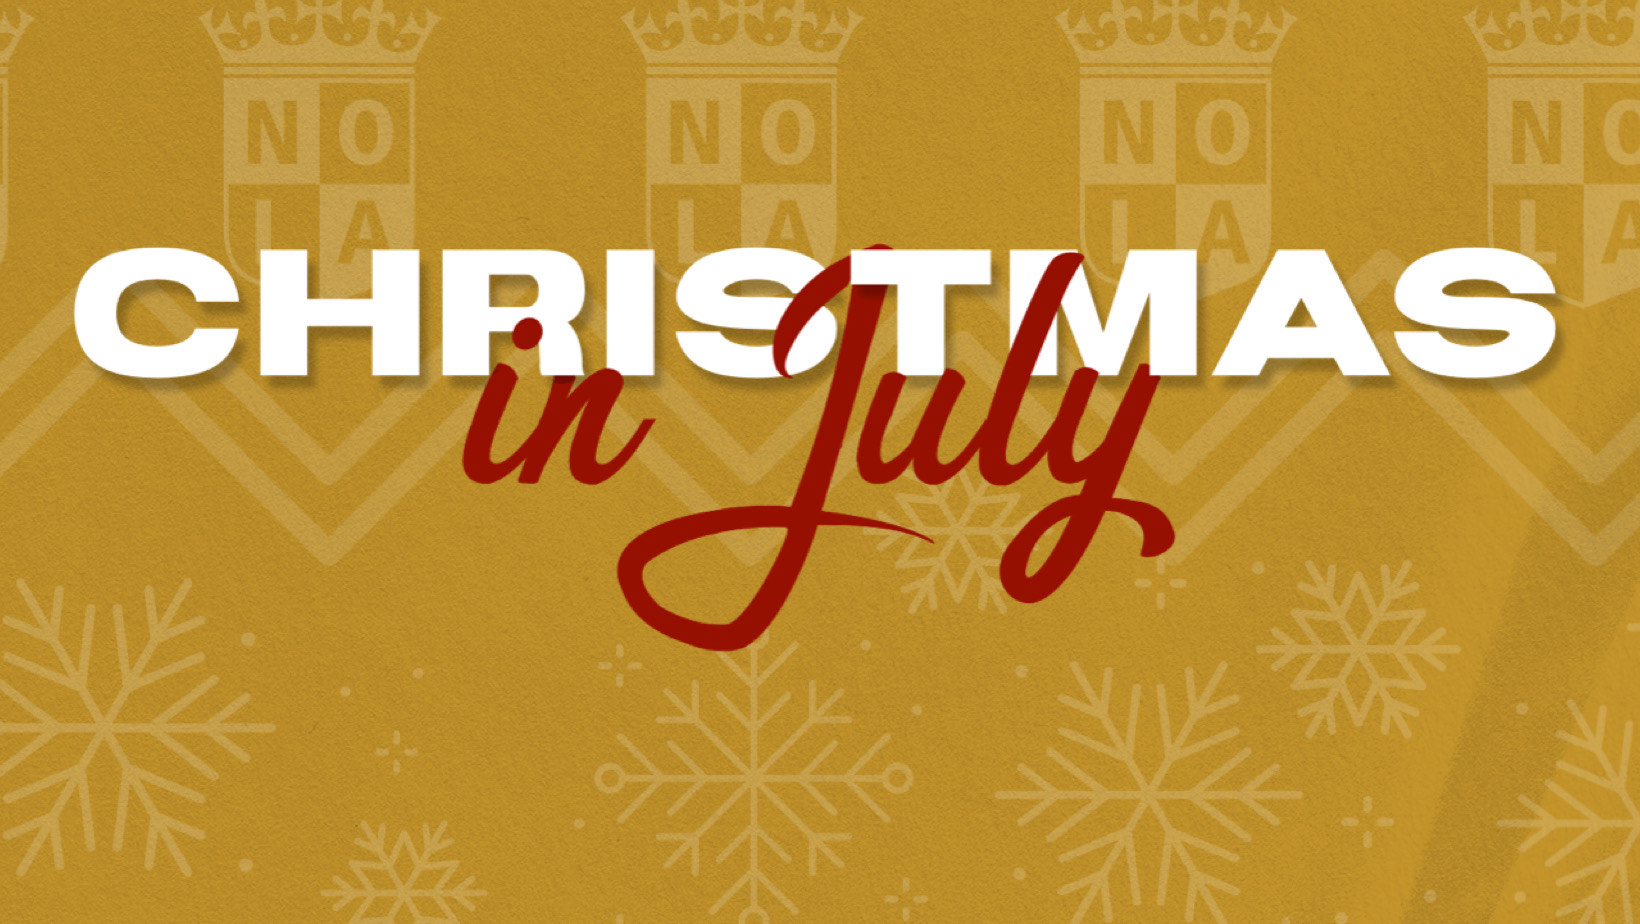 Christmas in July! Six Days of Golden GIVEAWAYS